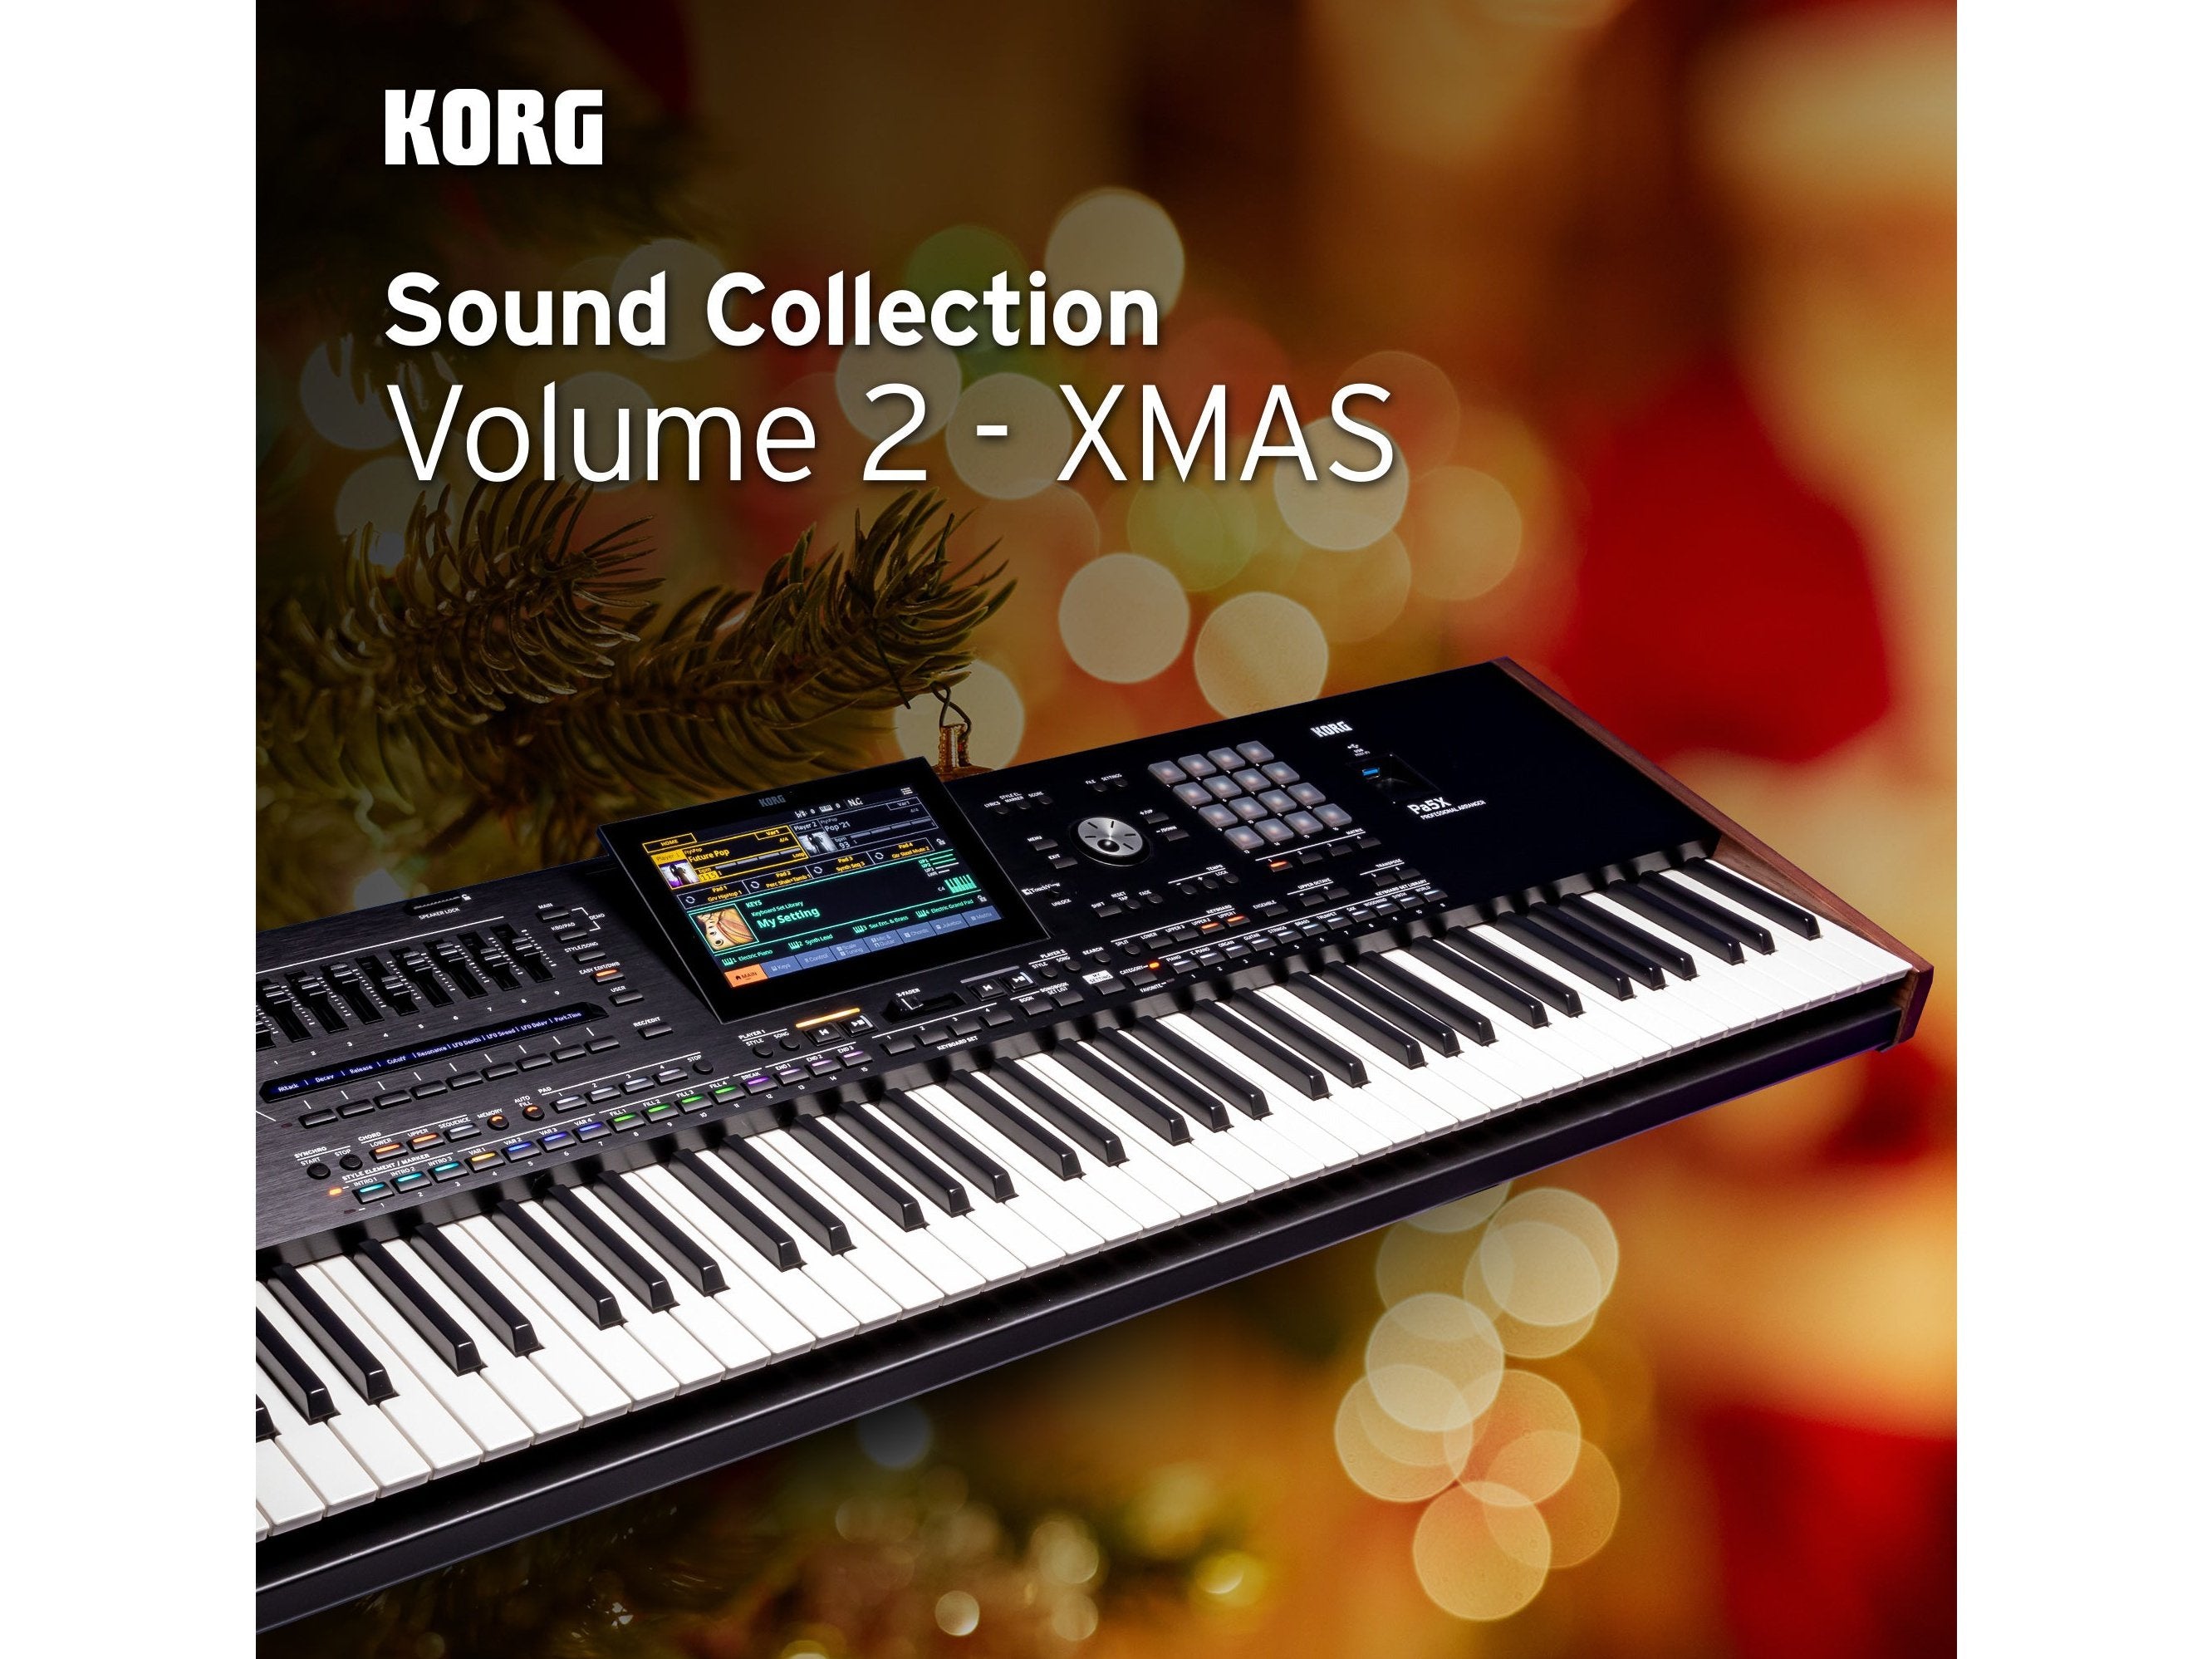 Korg Sound Collection 2 XMAS for Pa5X 1